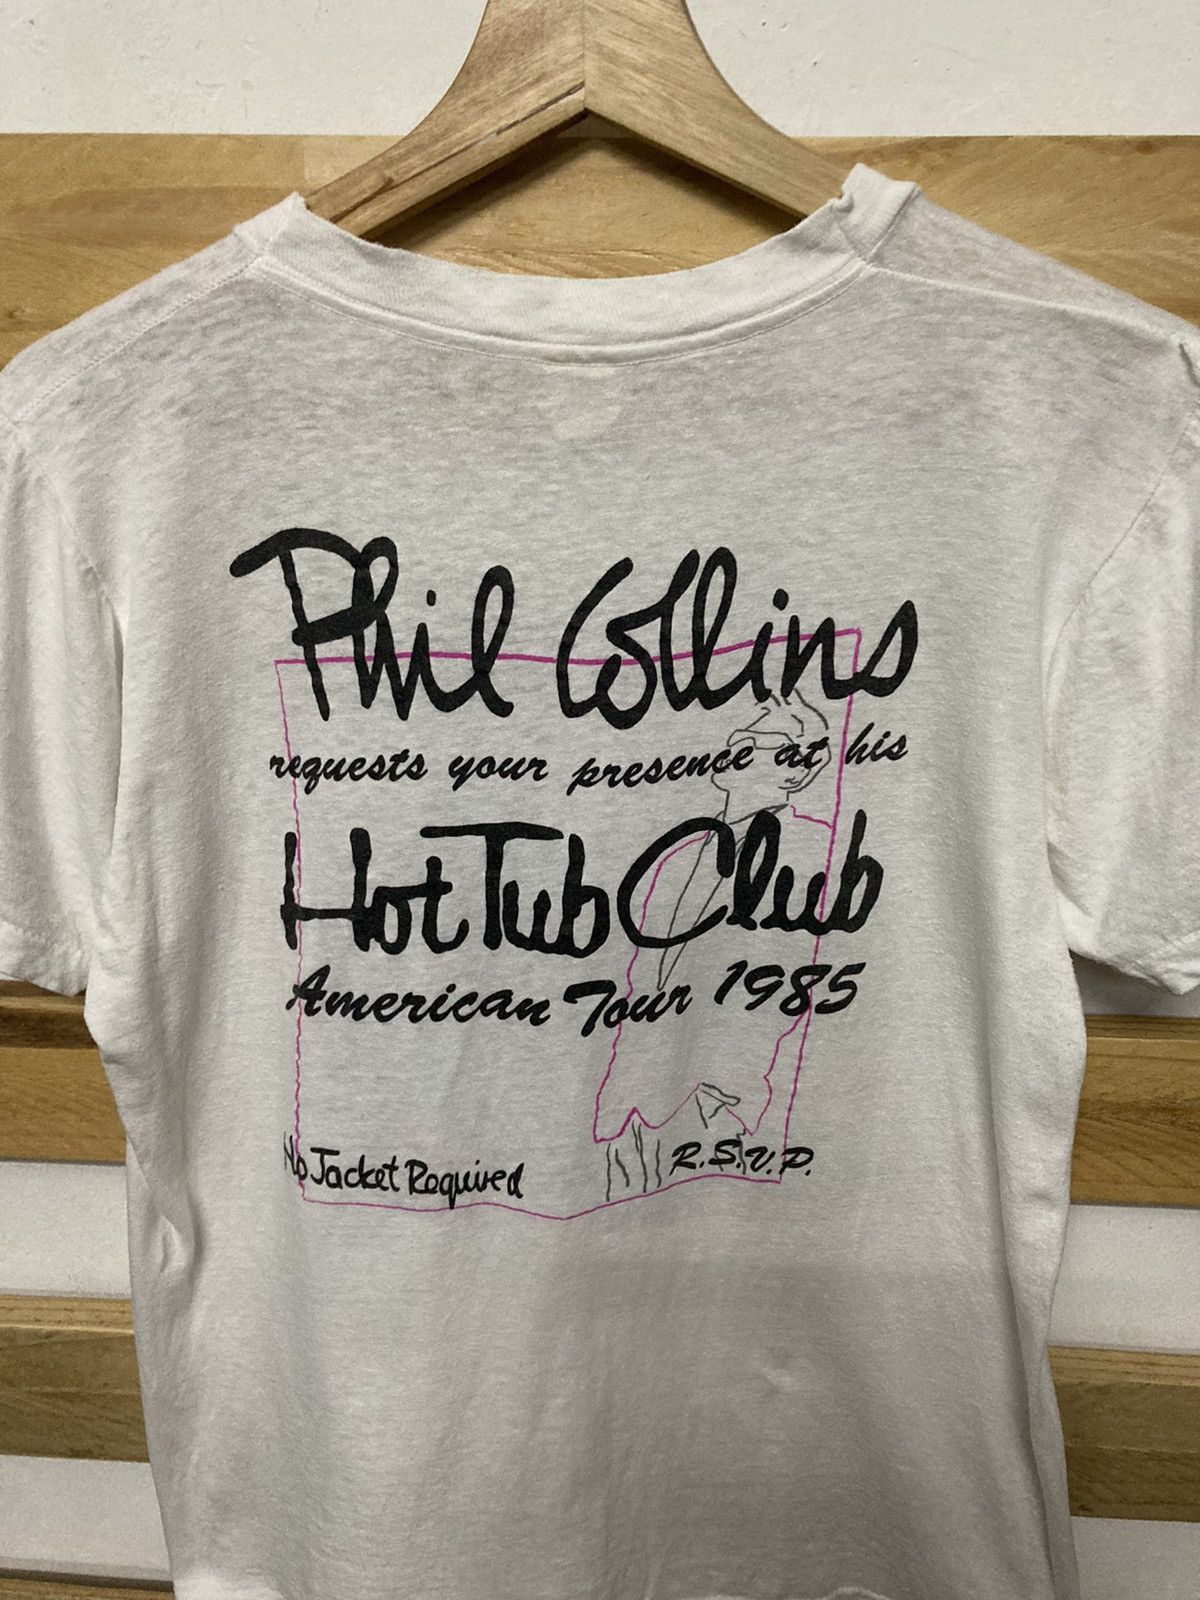 Vintage 1985 Phil Collins No Jacket Required Tour Tshirt - 6